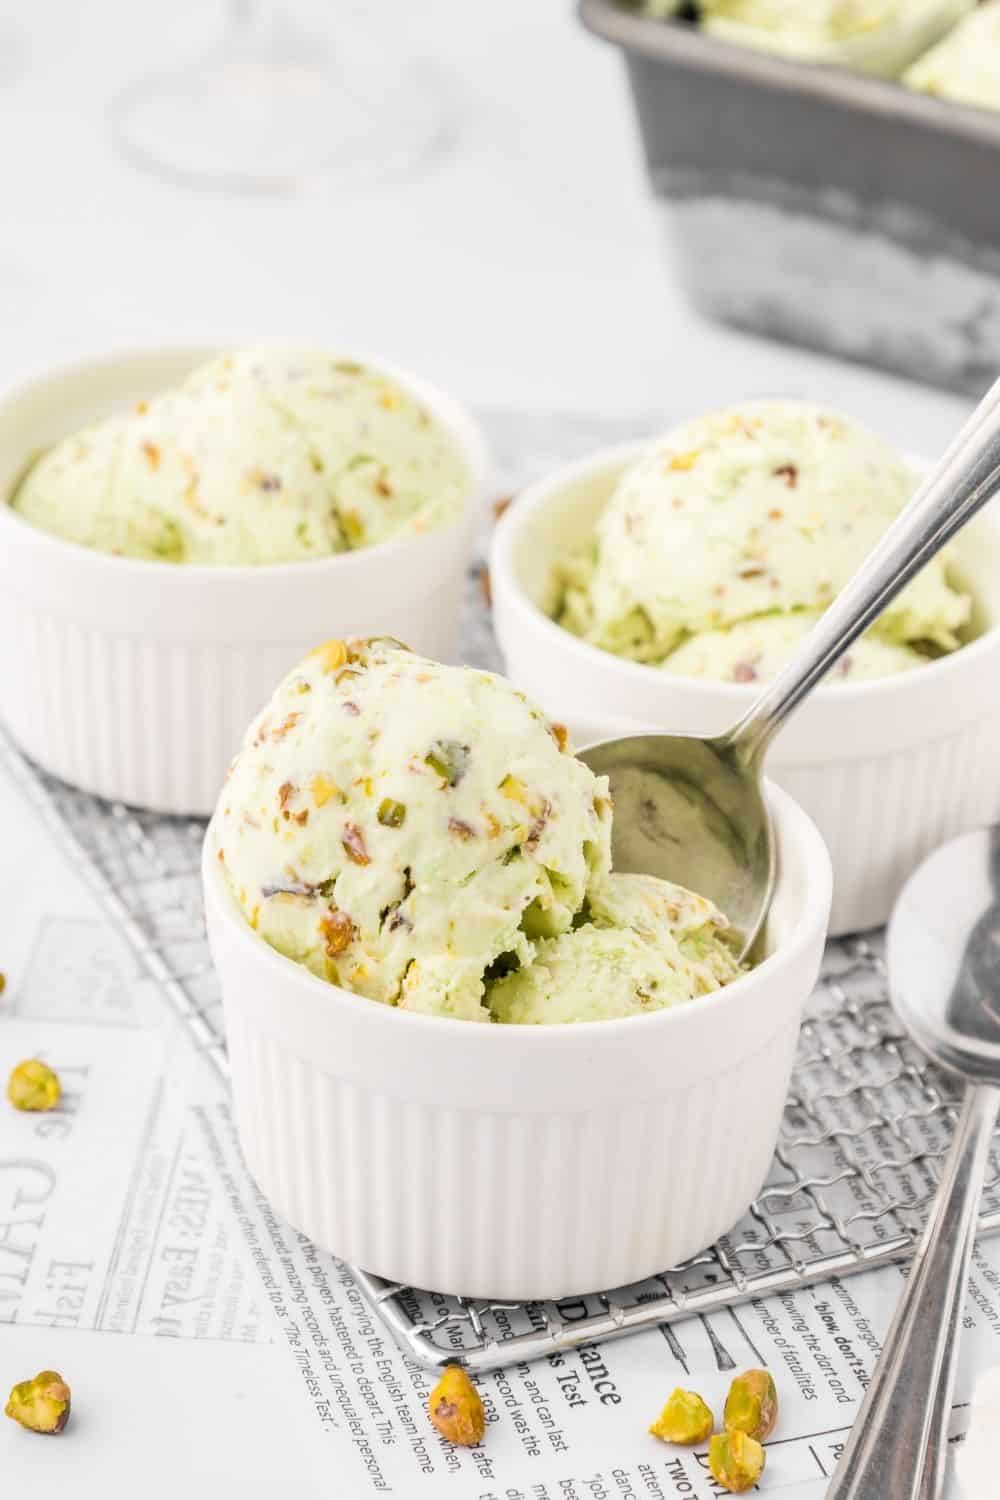 three small white bowls serve scoops of homemade pistachio ice cream. A spoon is in one bowl.